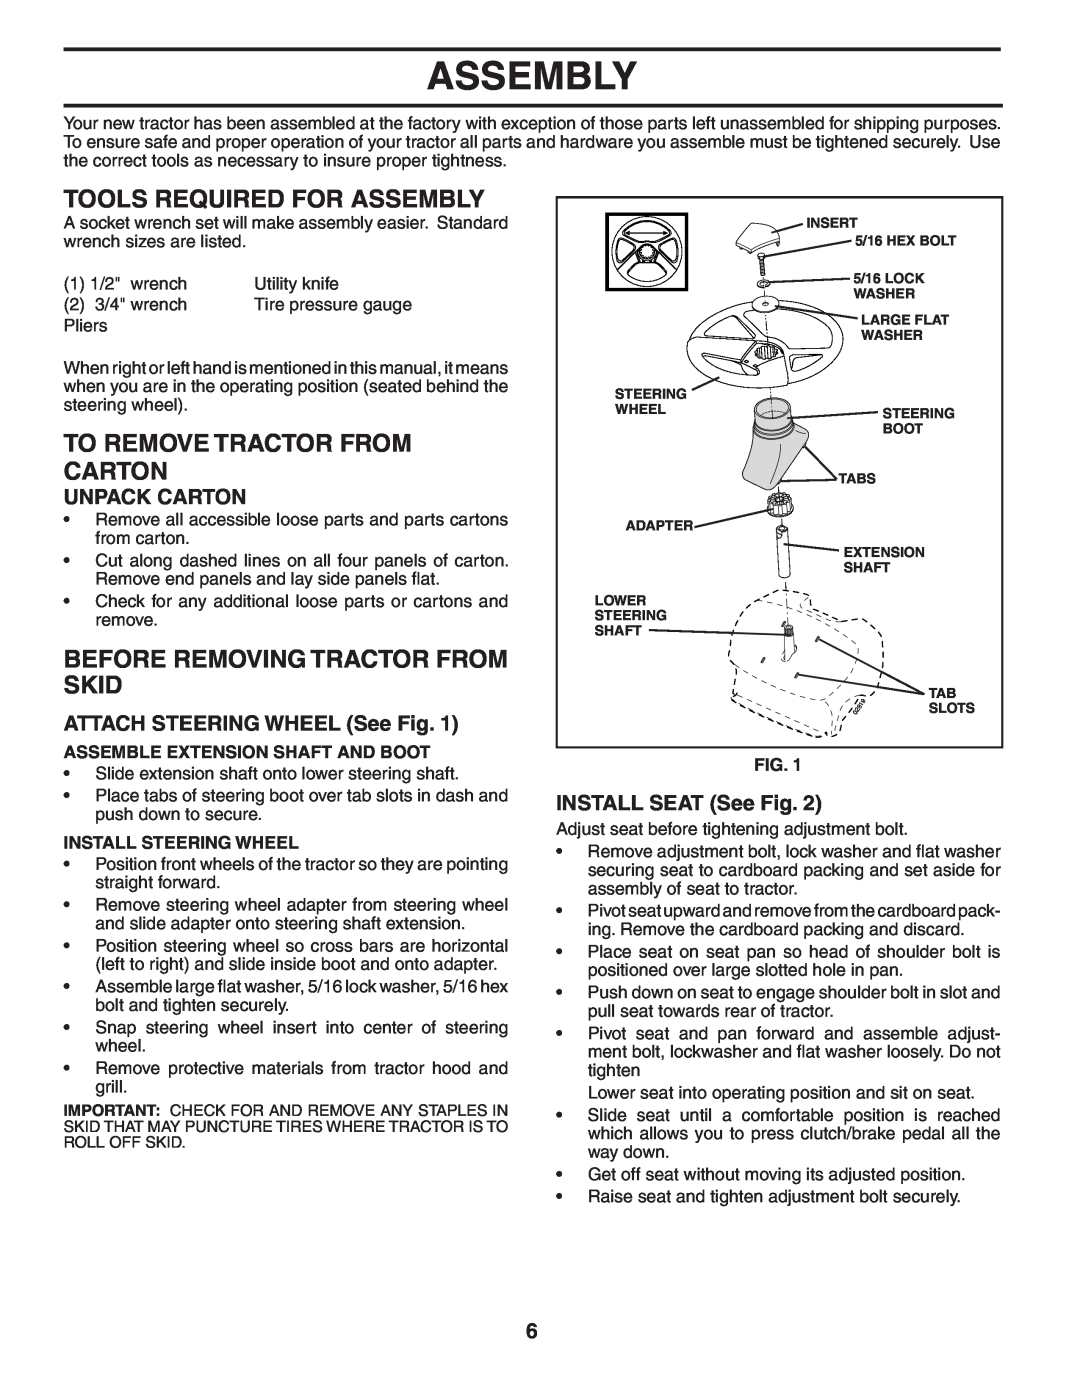 Poulan 403315 manual Tools Required For Assembly, To Remove Tractor From Carton, Before Removing Tractor From Skid 